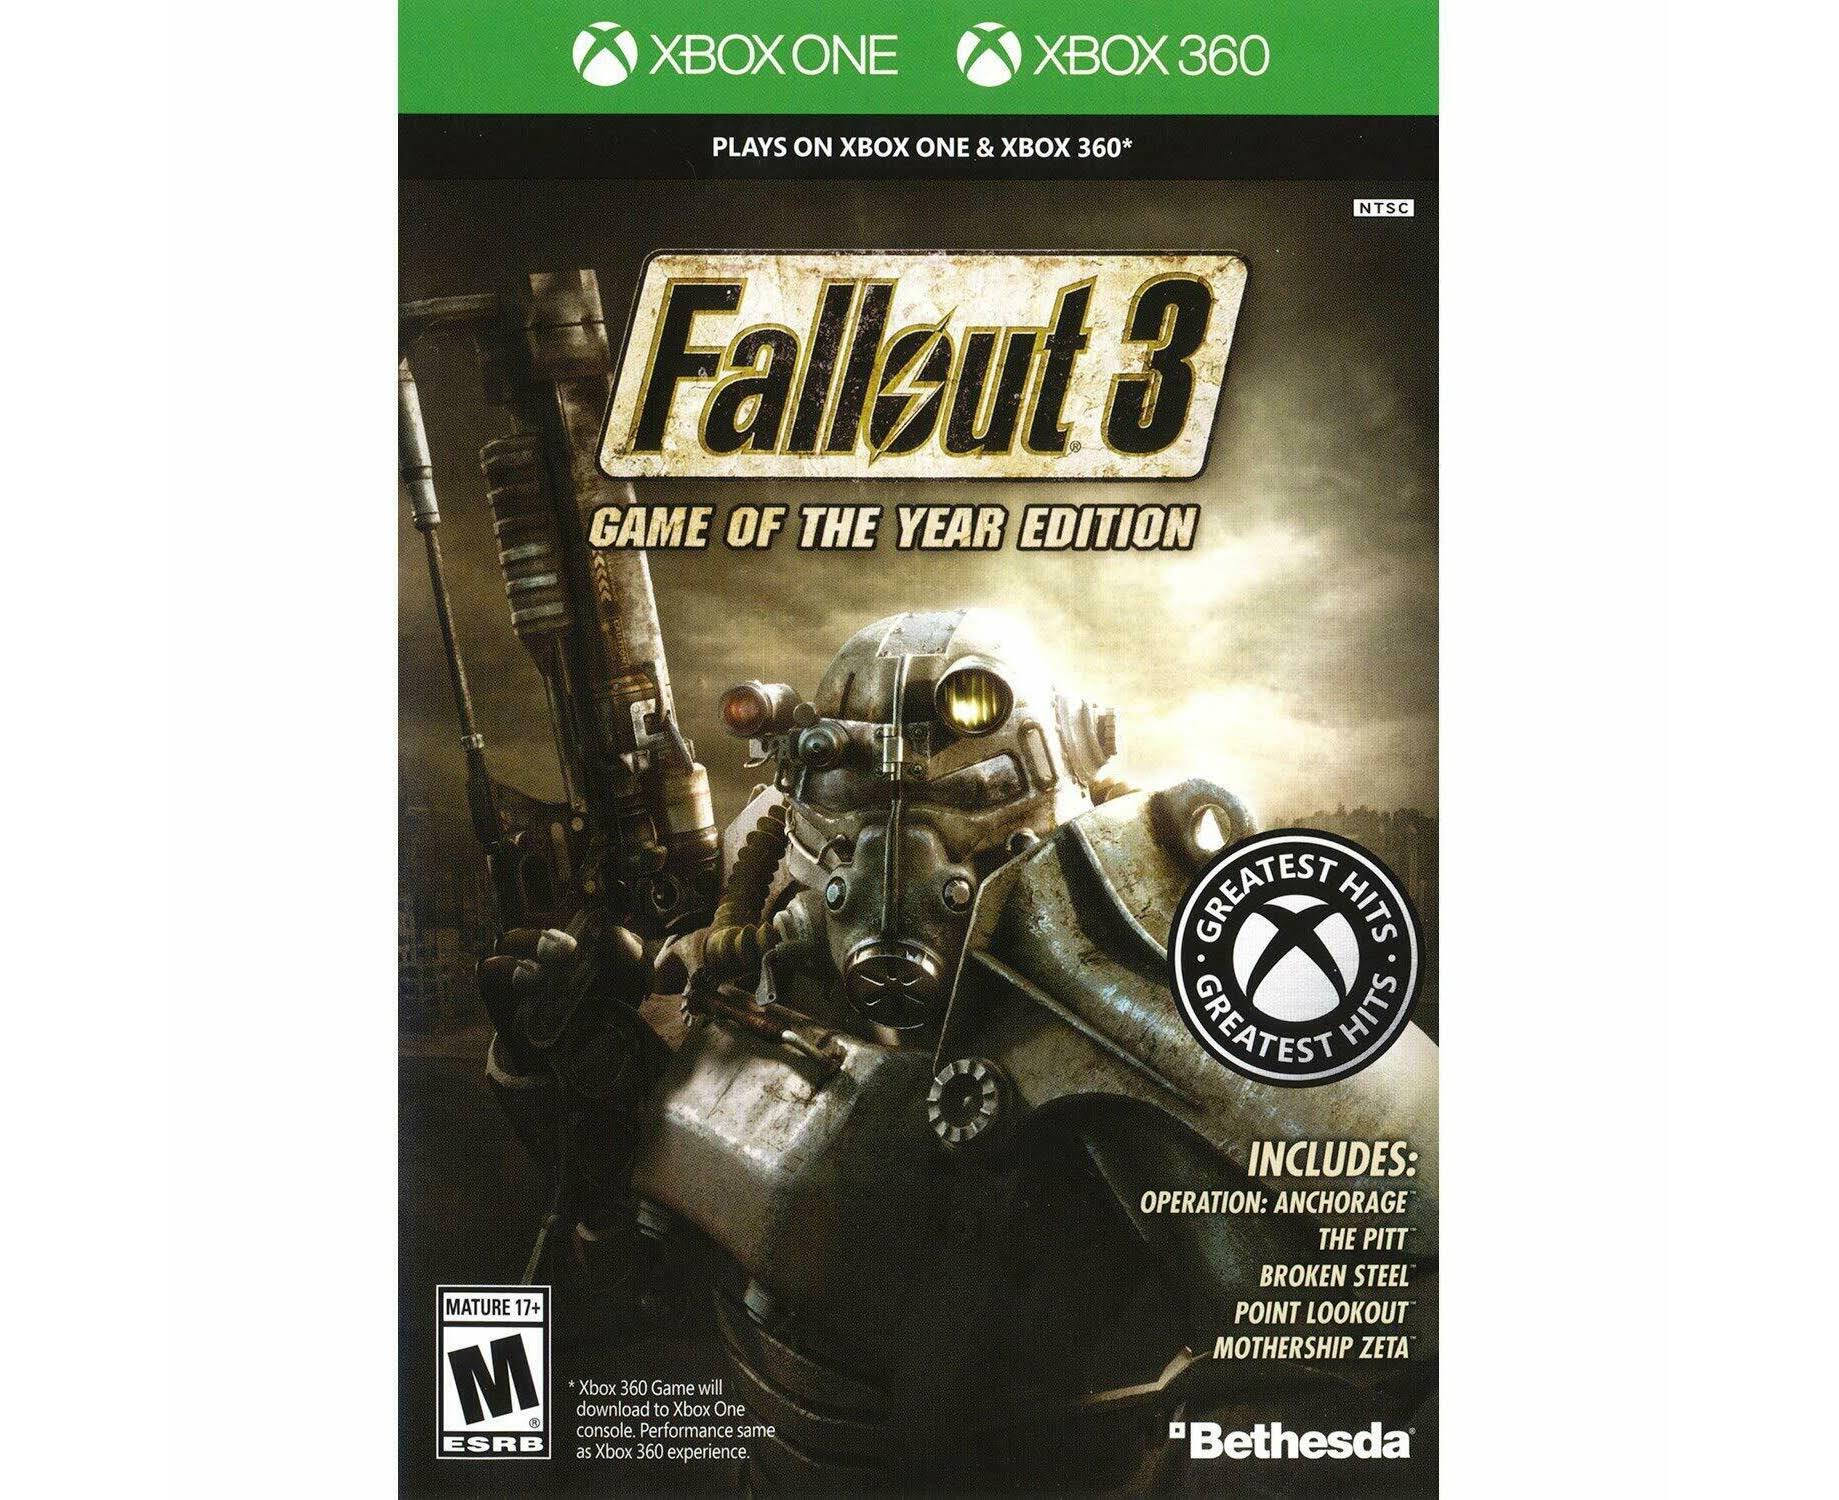 Fallout 3: Game of the Year Edition - Xbox 360